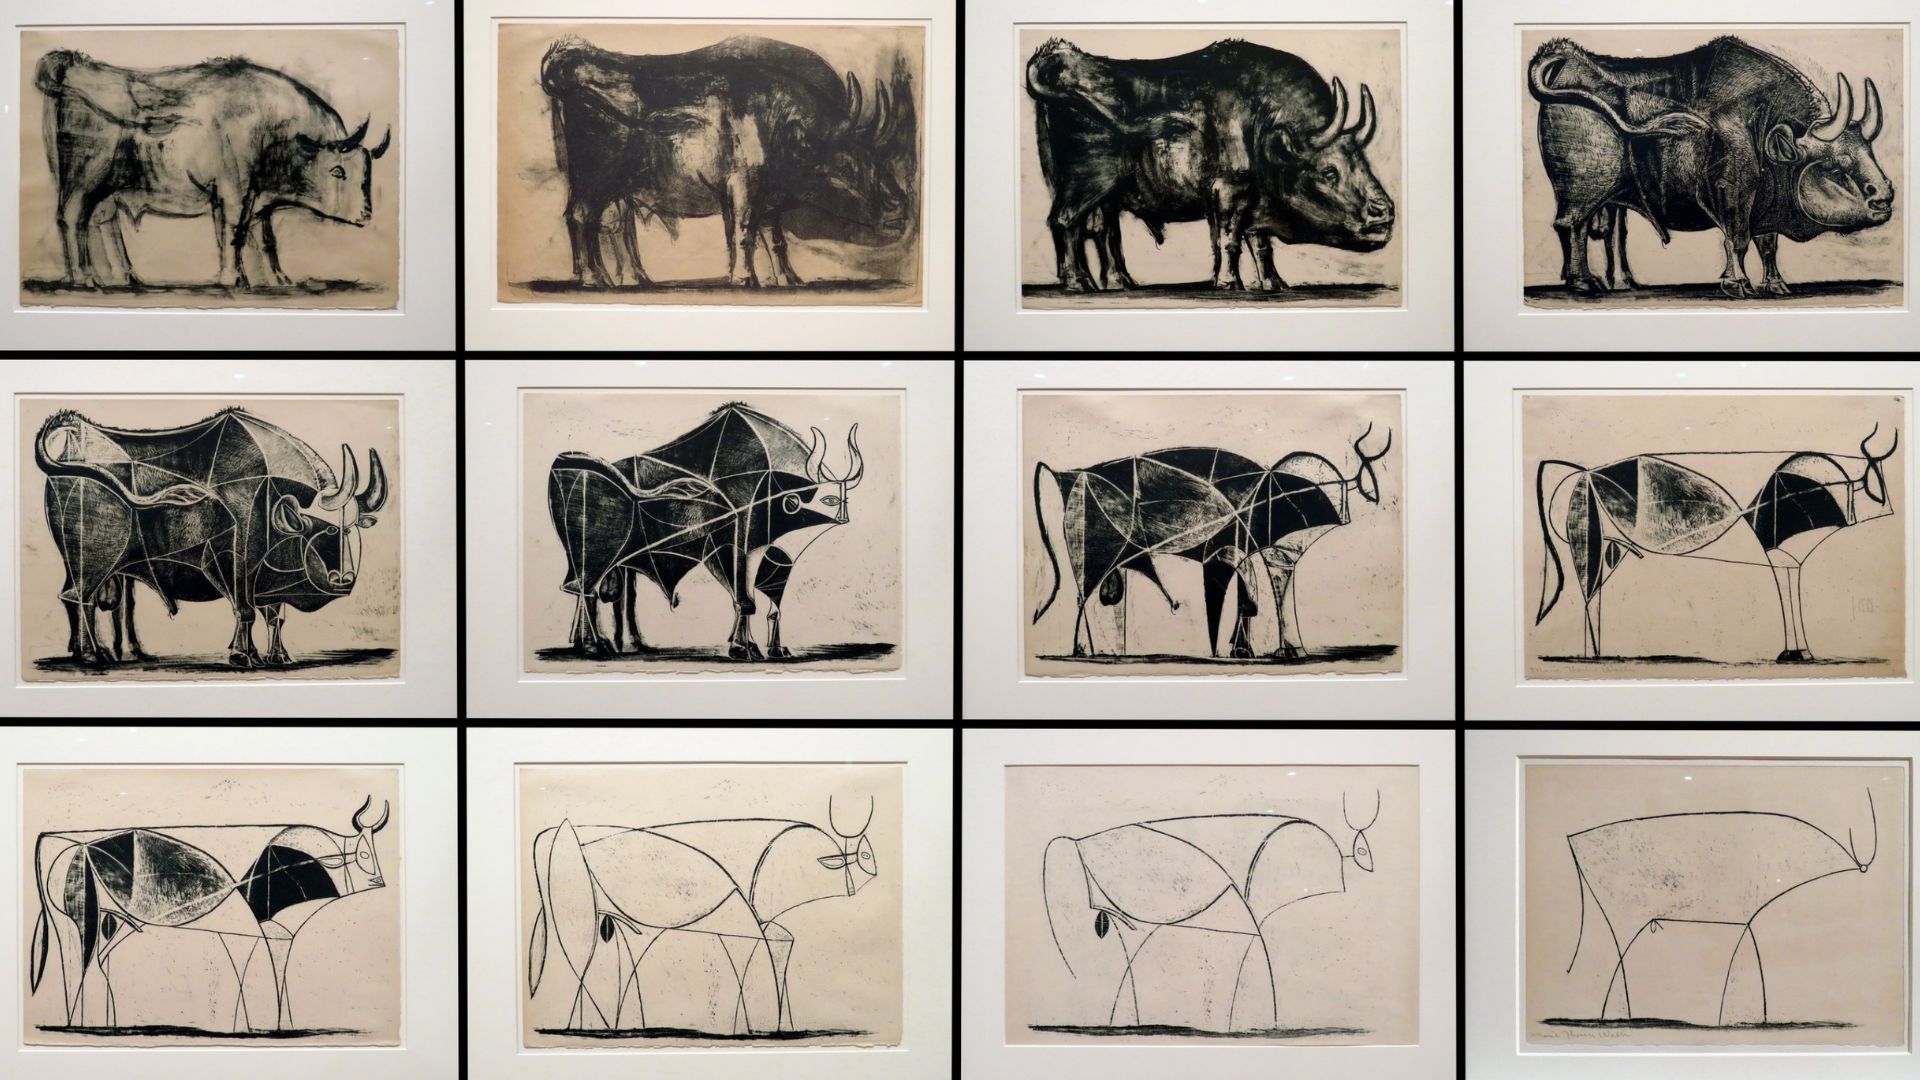 Picasso the Bull